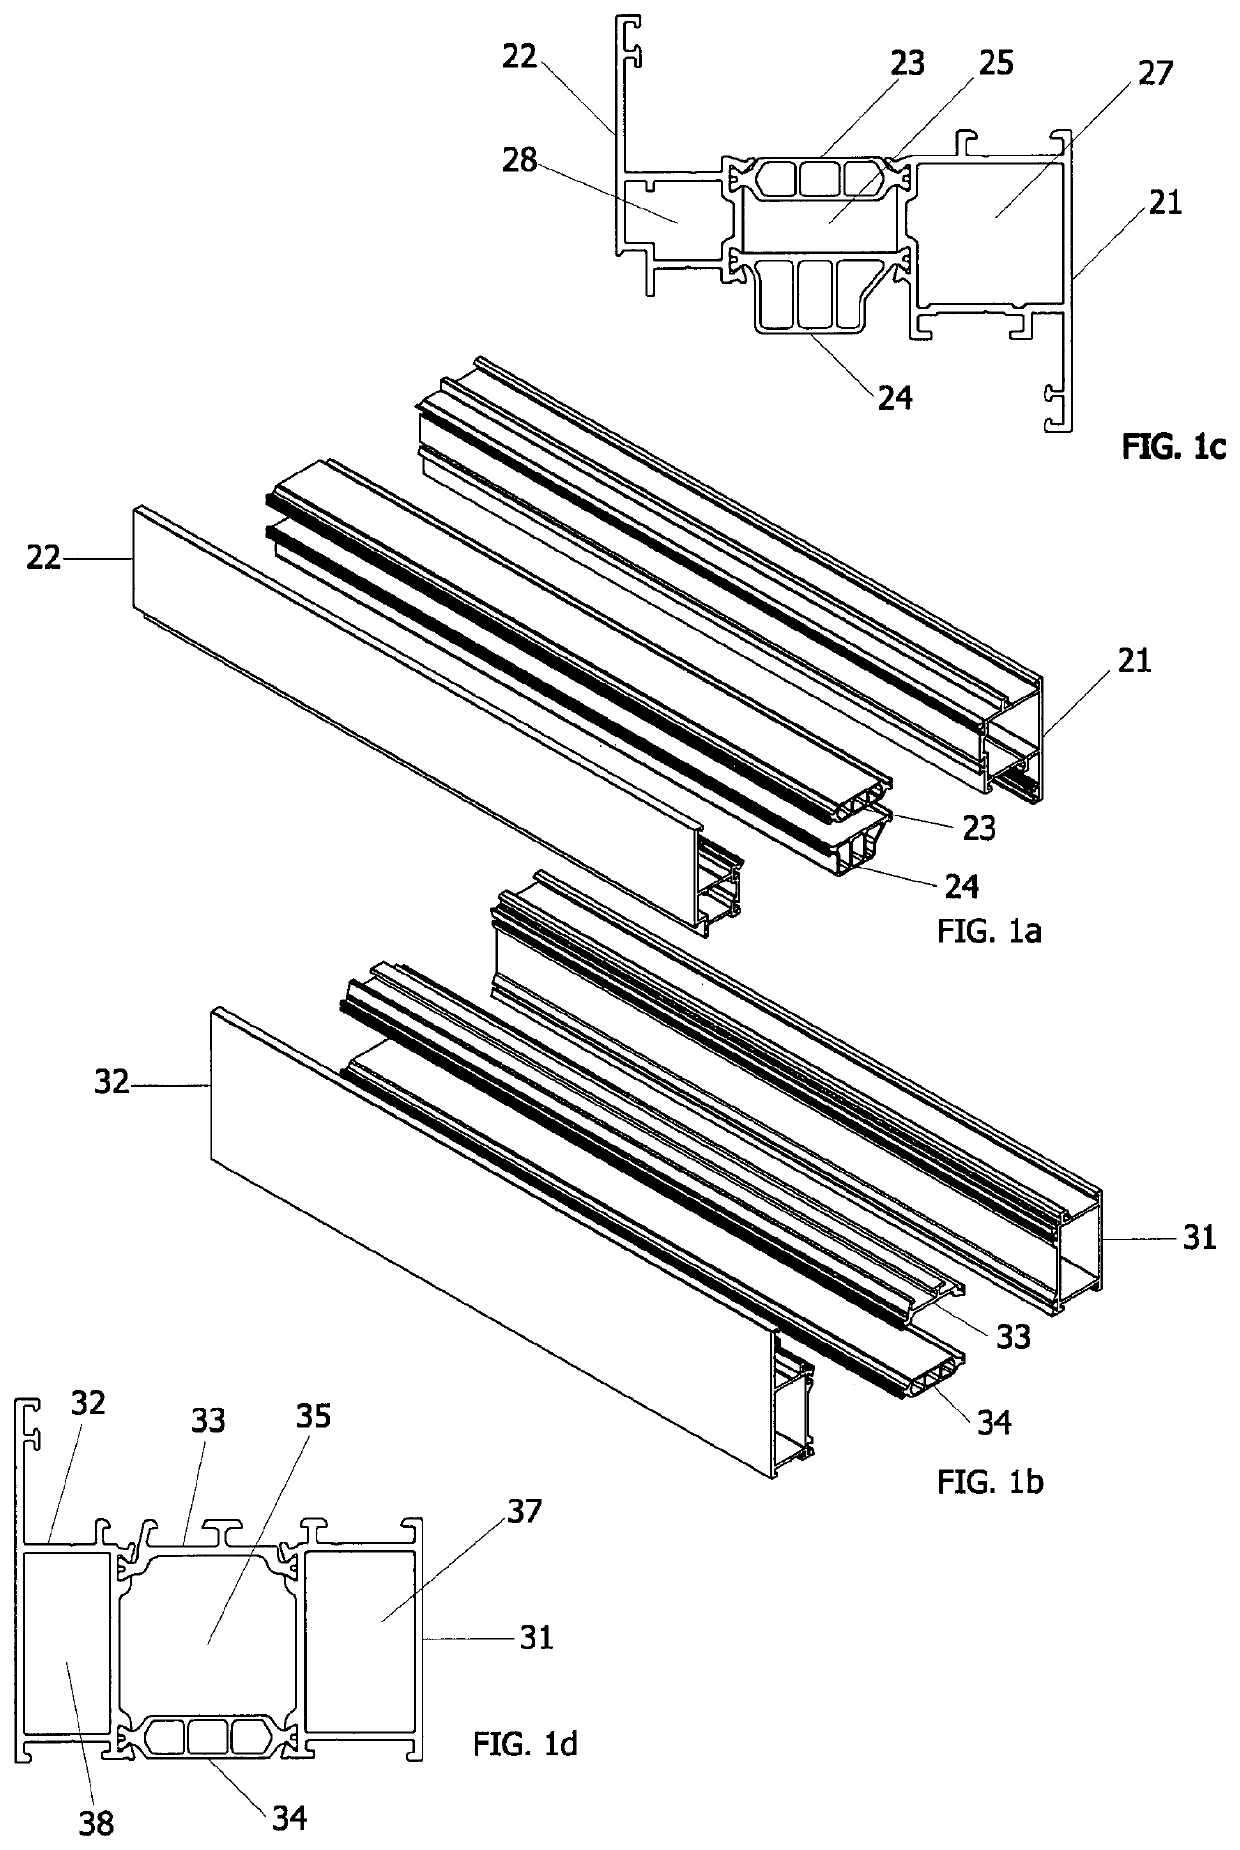 Device for delivering an insulation enhancing polyurethane foam within profiles used in doors, windows and related applications